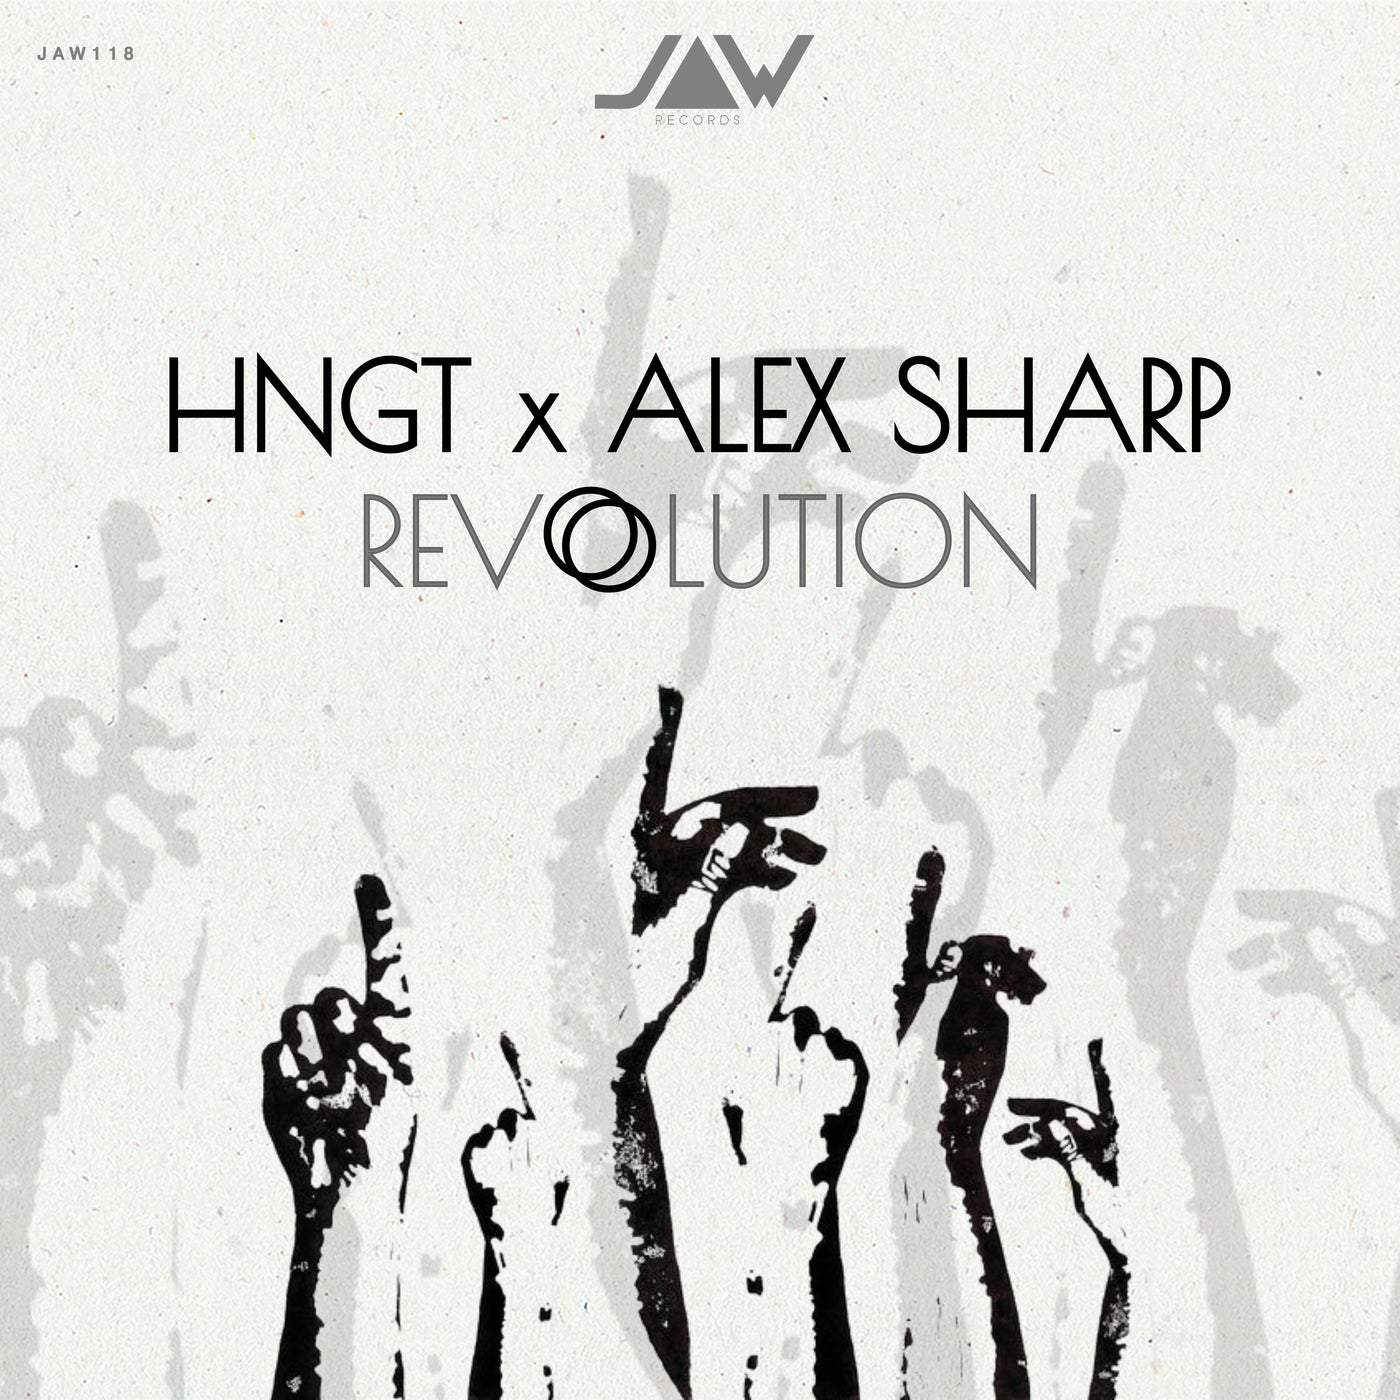 image cover: Revolution by Alex Sharp & HNGT on Jannowitz Records